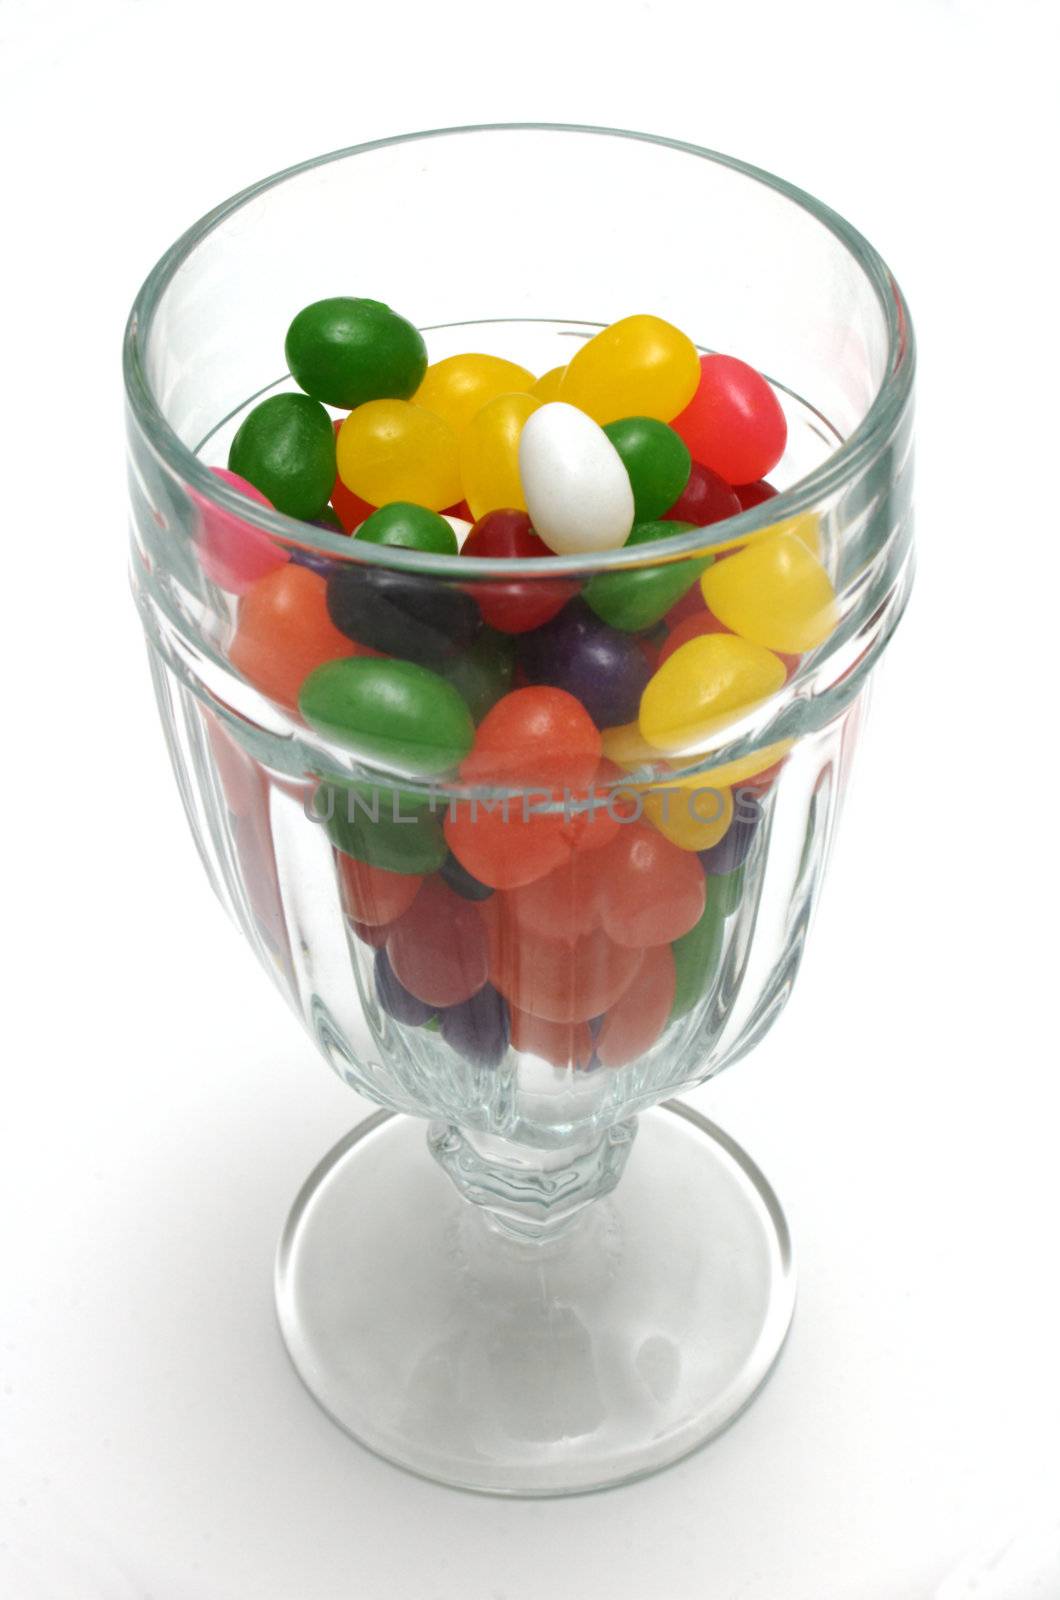 A glass sundae cup mostly filled with colorful jelly beans. The view is from slightly above, vertically oriented over white.